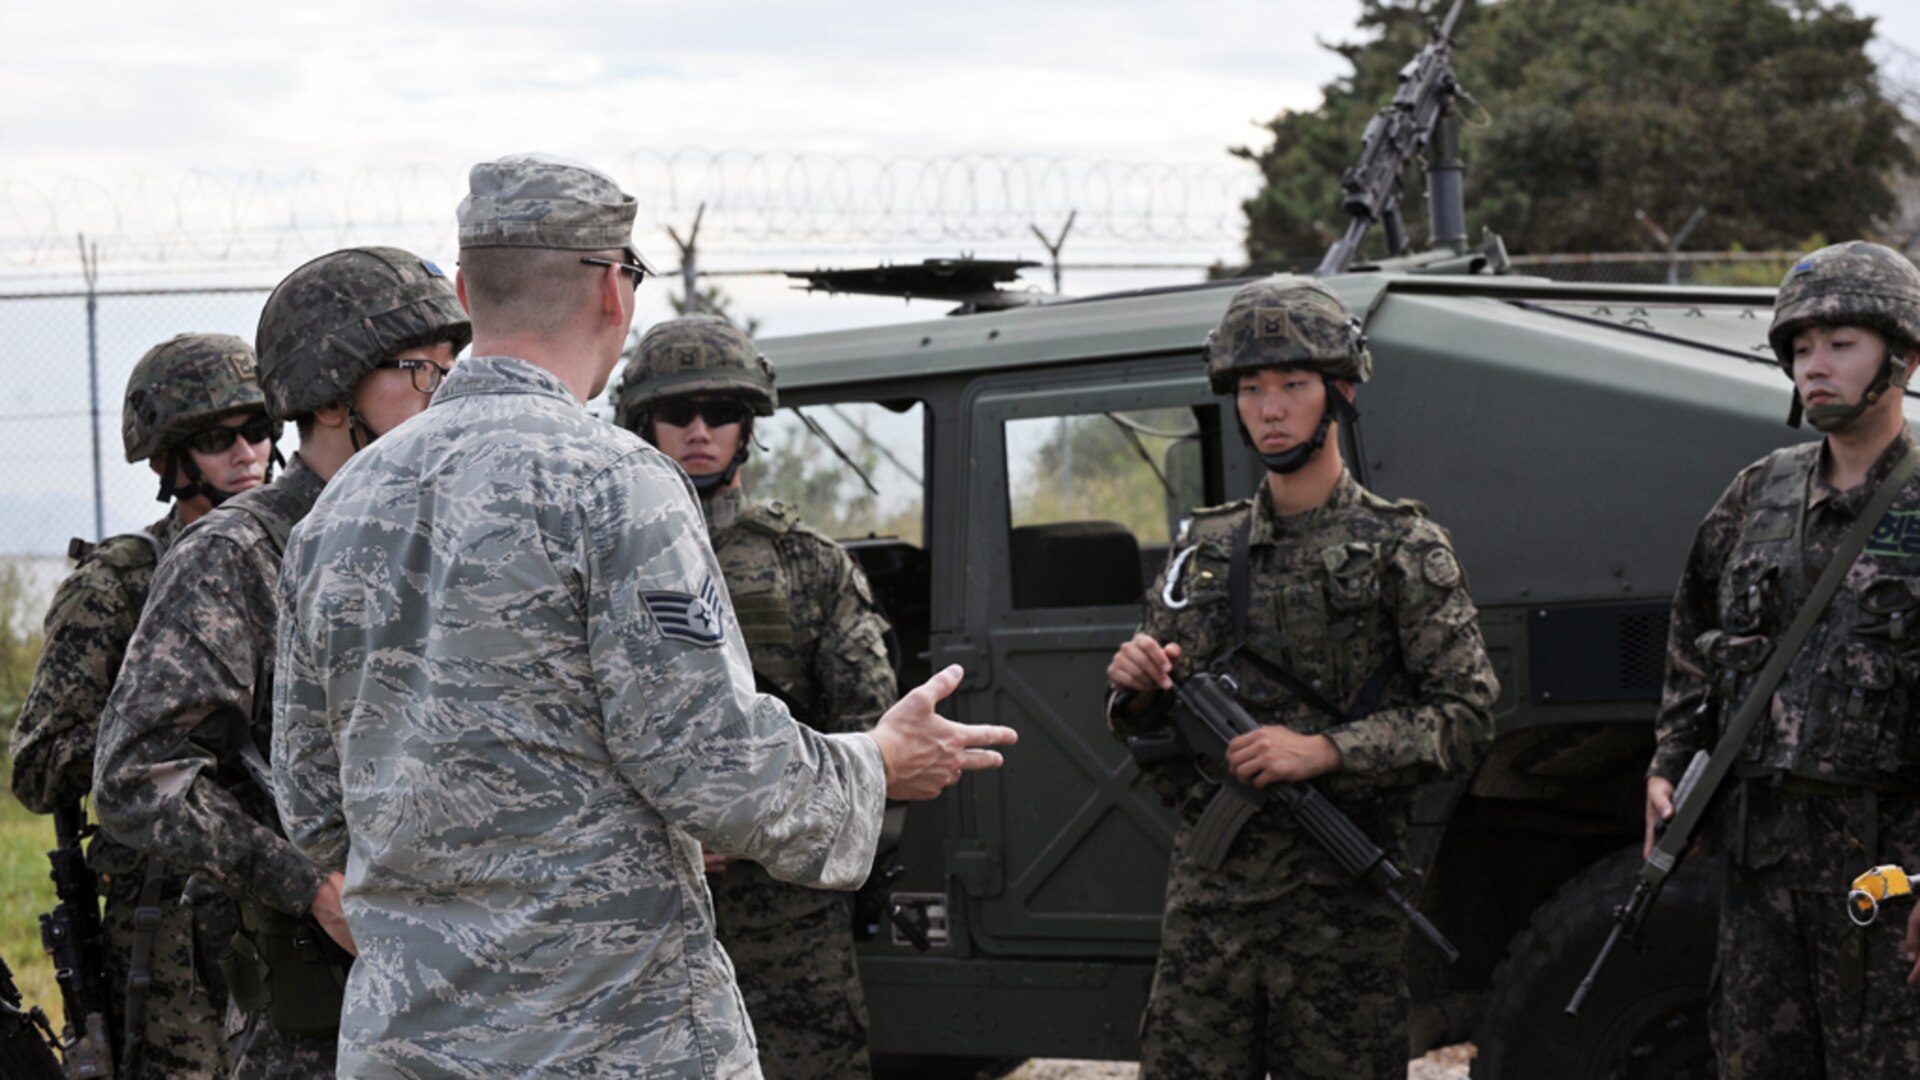 KUNSAN AIR BASE, Republic of Korea (Sept 16, 2014) - Staff Sgt. Calin Cronin, 8th Security Forces Squadron Air Base Defense non-commissioned officer in charge, provides feedback to Republic of Korea Air Force members following a simulated mounted and dismounted exercise during combat readiness training. Integrating Airmen of all ranks - from airmen basic to company grade officers - with ROKAF members in quarterly CRTs helps instill a mindset of teamwork to ultimately ensure maximum security and safety of the Wolf Pack family. 140916-F-ES731-338

